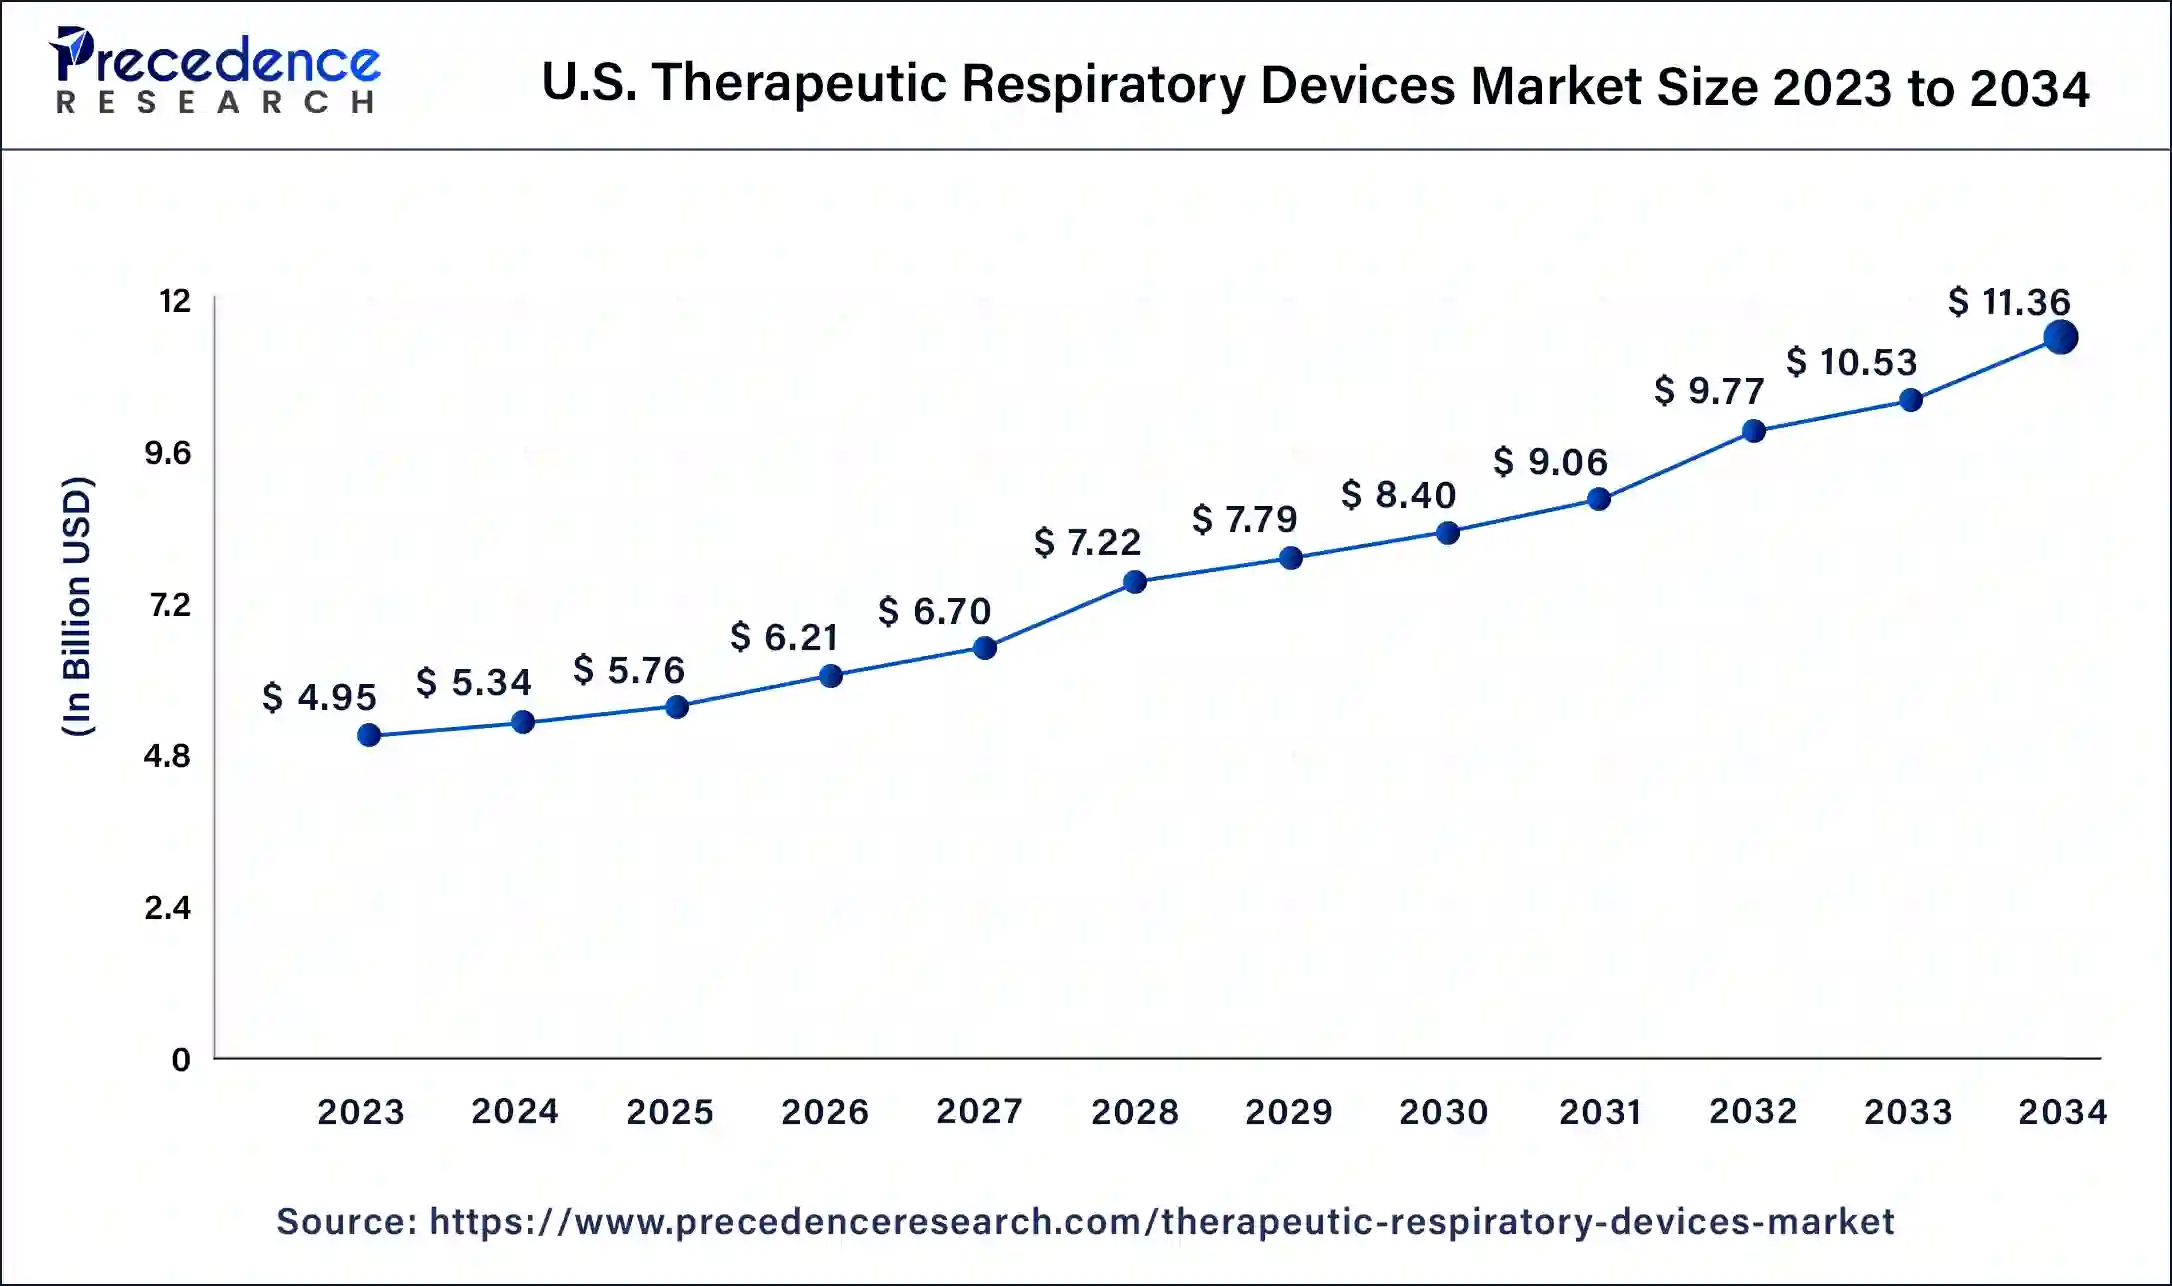 U.S. Therapeutic Respiratory Devices Market Size 2024 to 2034